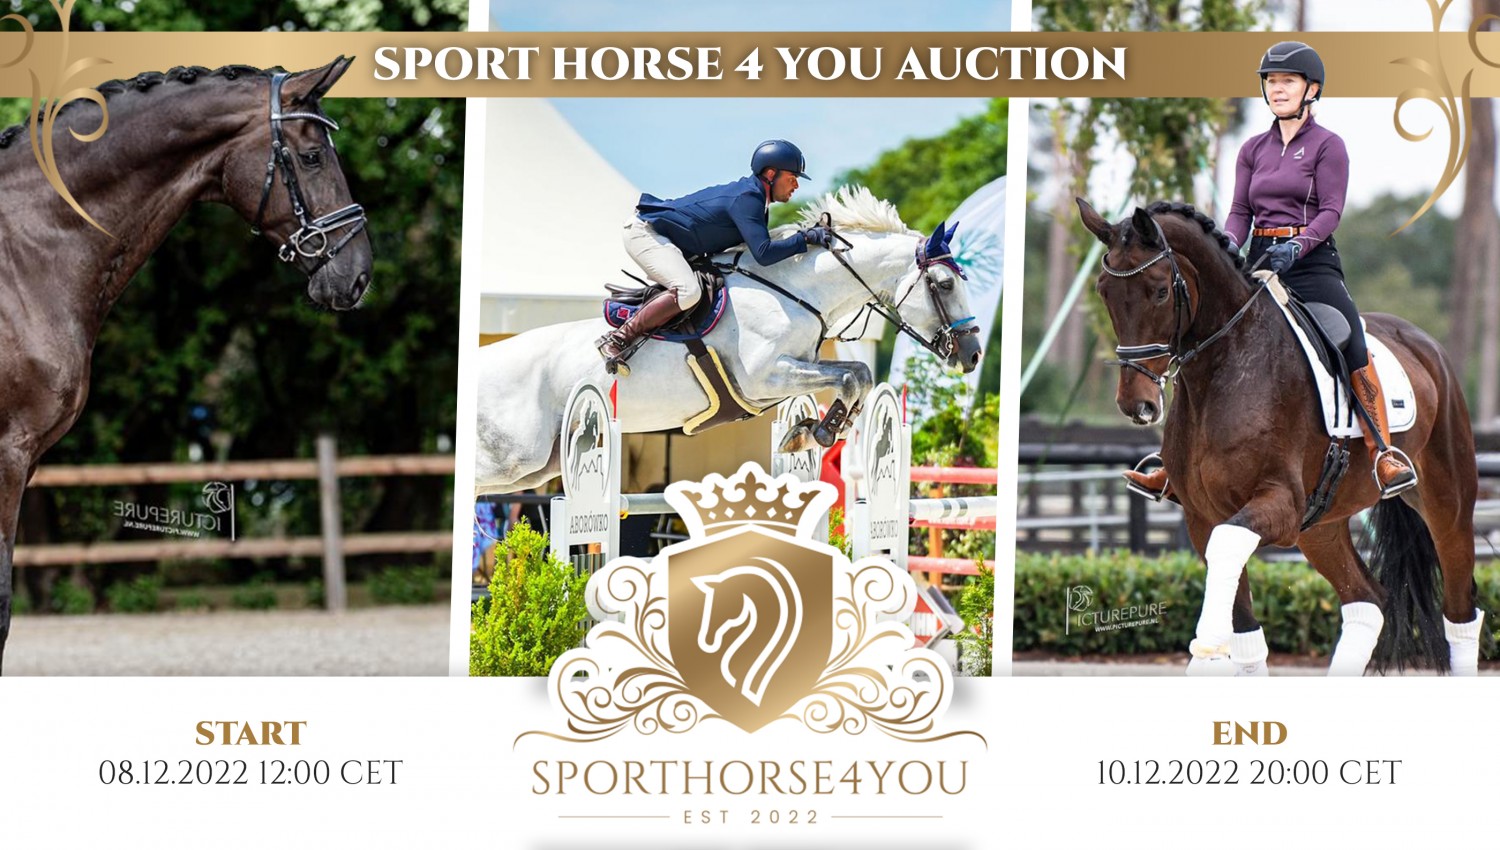 SPORTHORSE4YOU AUCTION